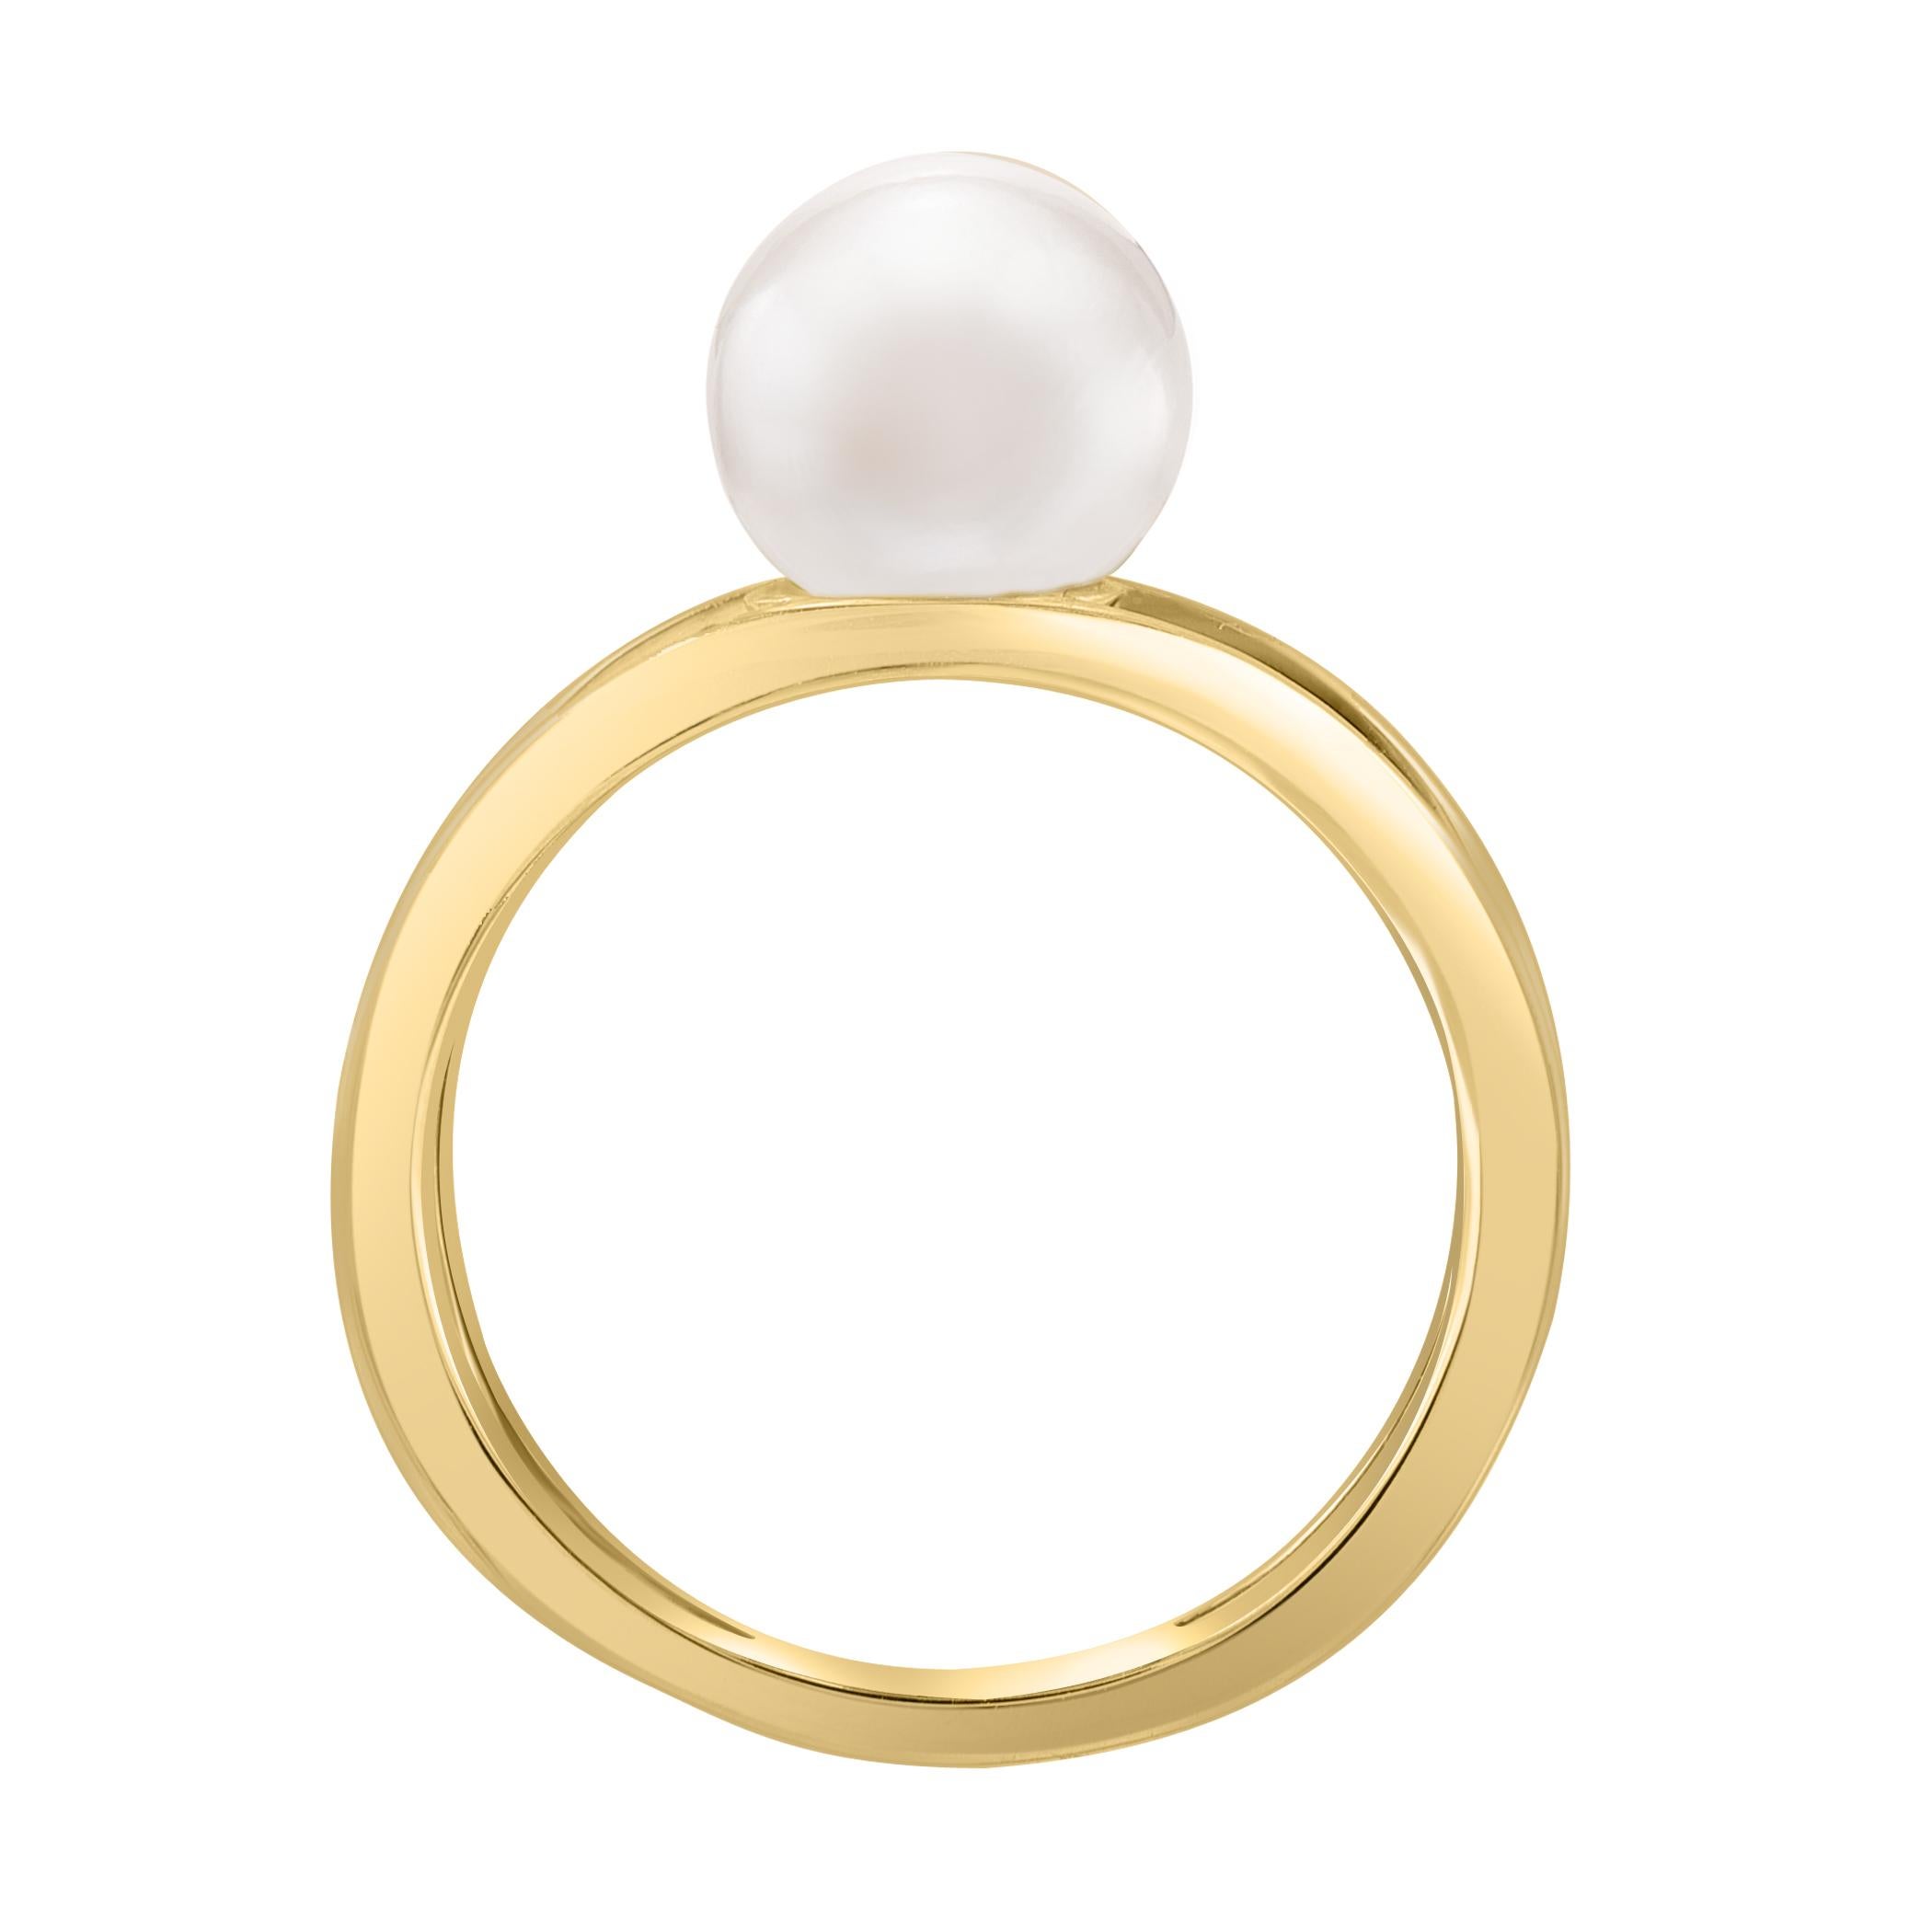 Stunning 14k Yellow Gold split shank ring featuring an 8mm Akoya pearl. 

Ring Size 7.